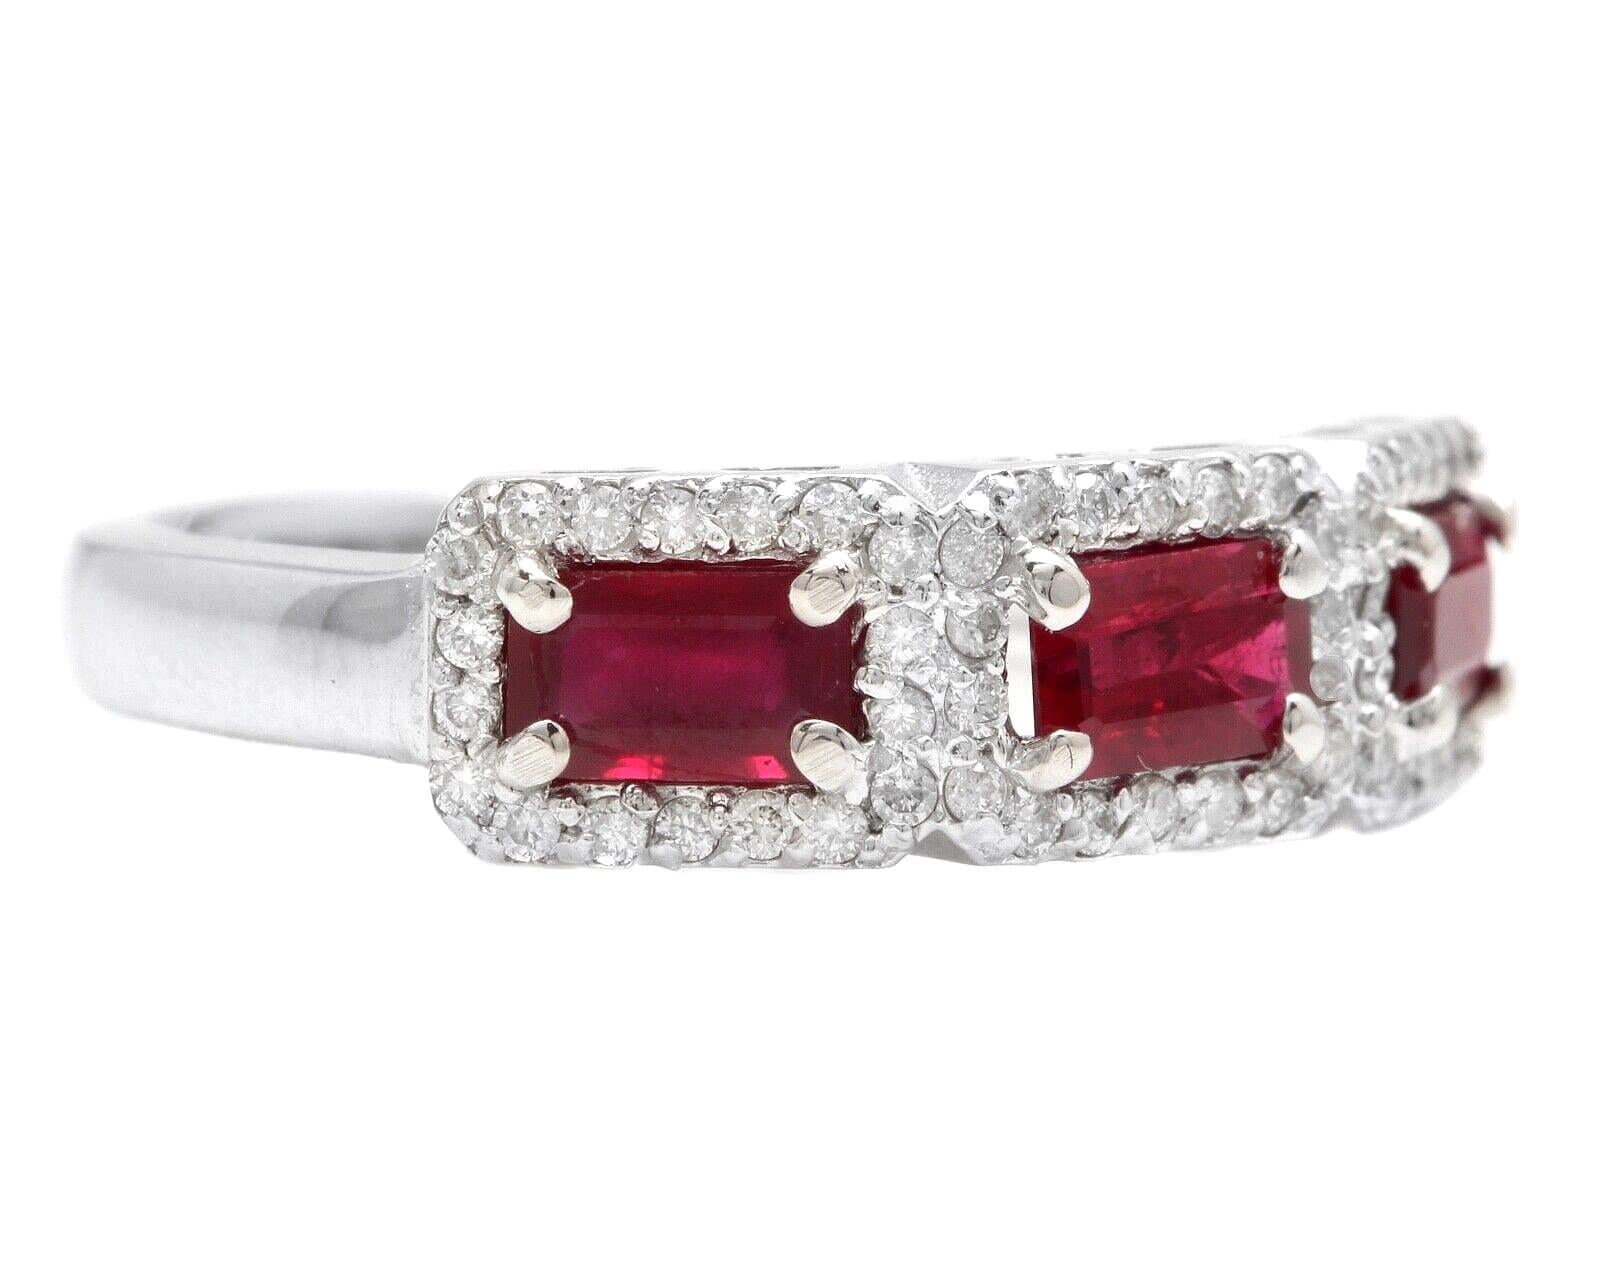 1.22 Carats Impressive Natural Red Ruby and Diamond 14K White Gold Ring

Suggested Replacement Value $5,000.00

Total Natural Emerald Cut Red Ruby Weight is: Approx. 1.00 Carat 

Ruby Measures: Approx. 5.00 X 3.00mm 

Natural Round Diamonds Weight: